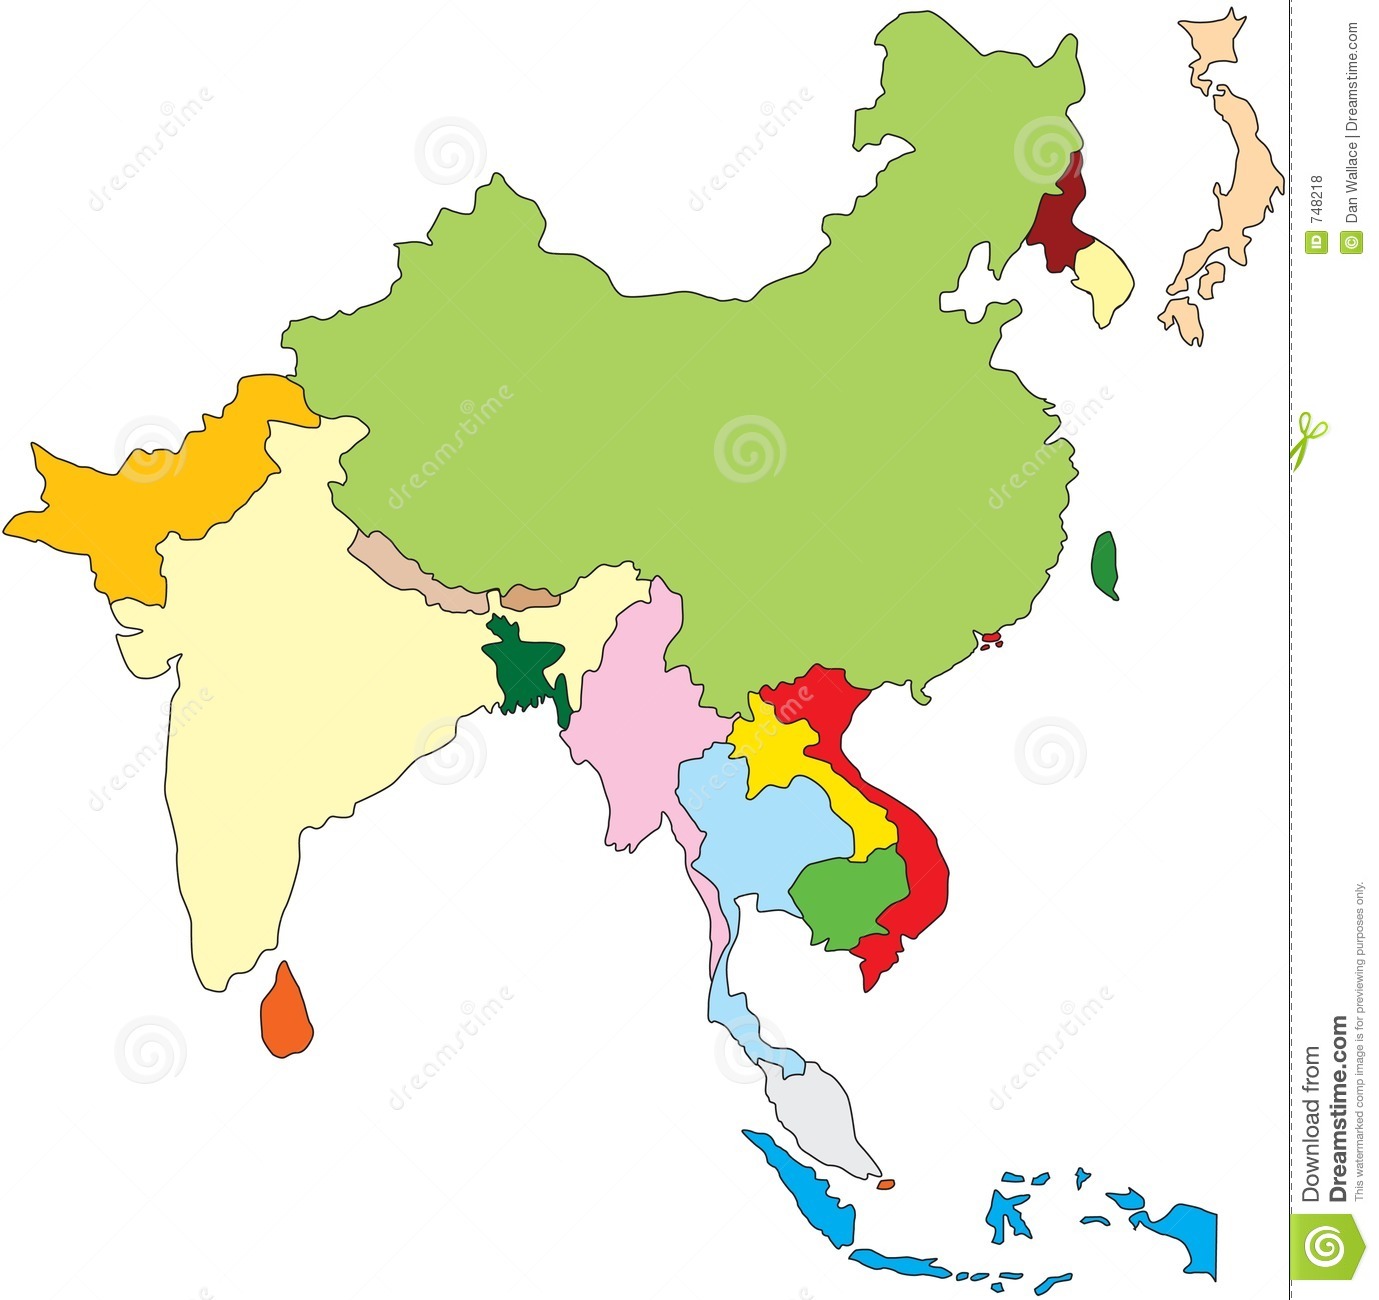 16 Vector South East Asia Maps Images